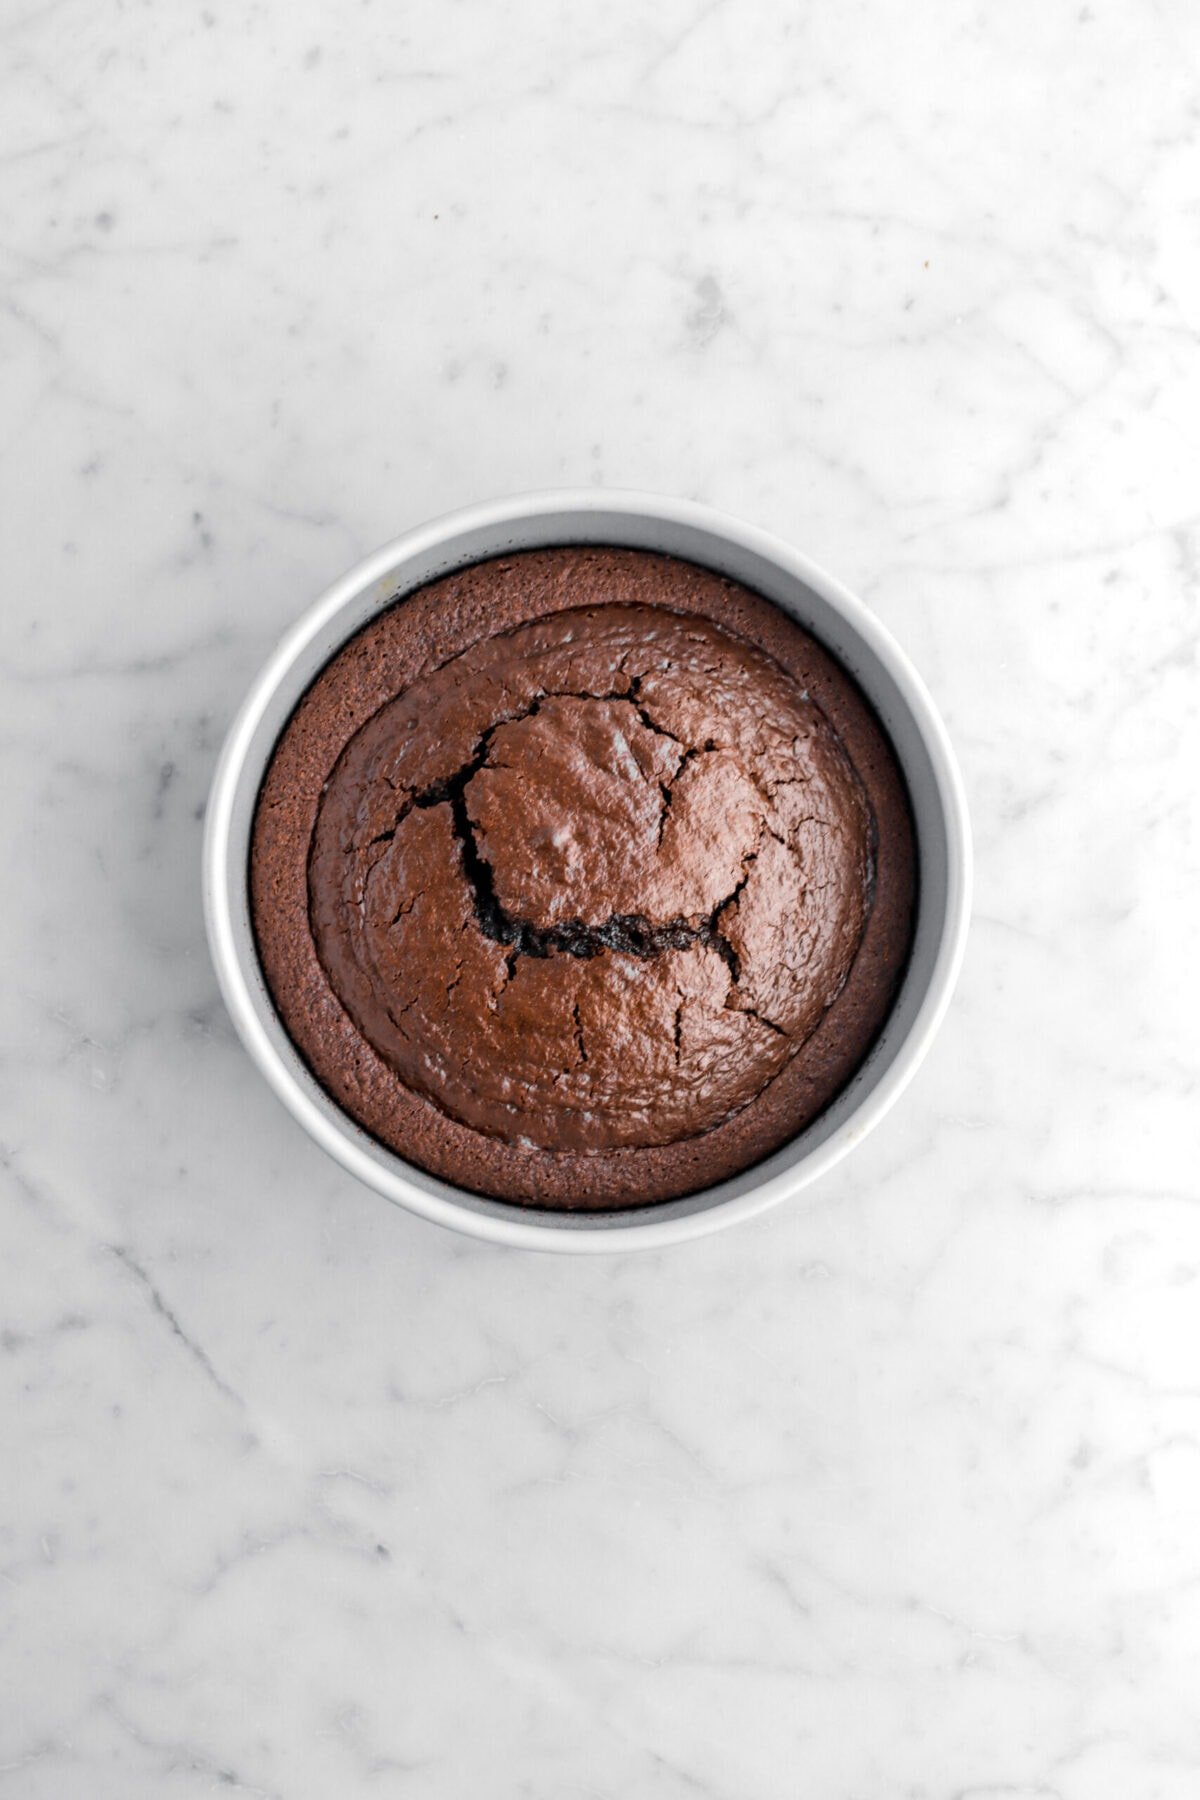 baked chocolate cake in round pan.